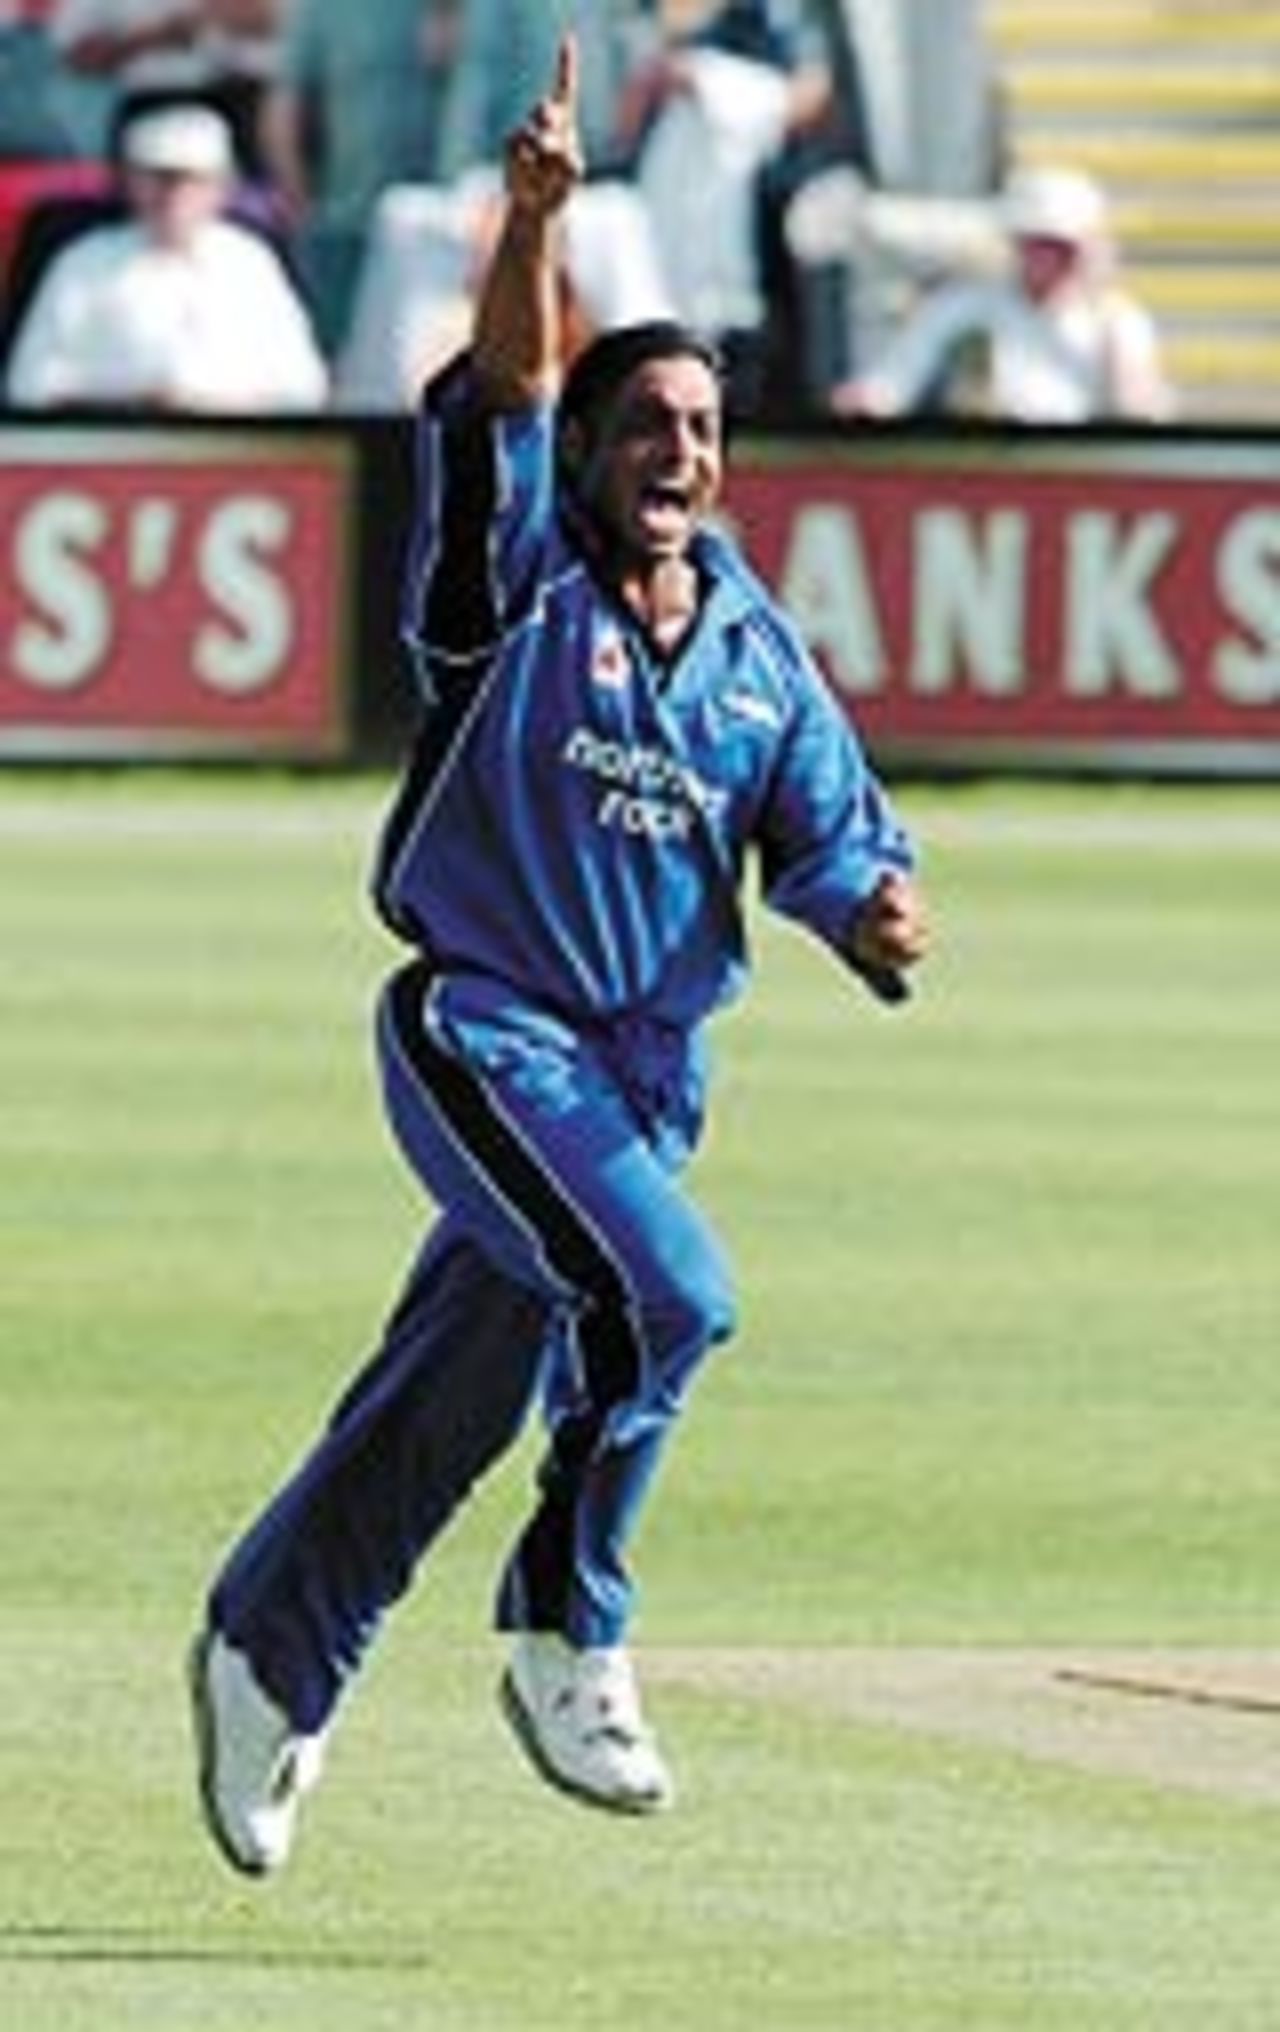 Shoaib Akhtar of Durham celebrates the wicket of Graeme Hick, Worcestershire v Durham, New Road, May 16, 2004